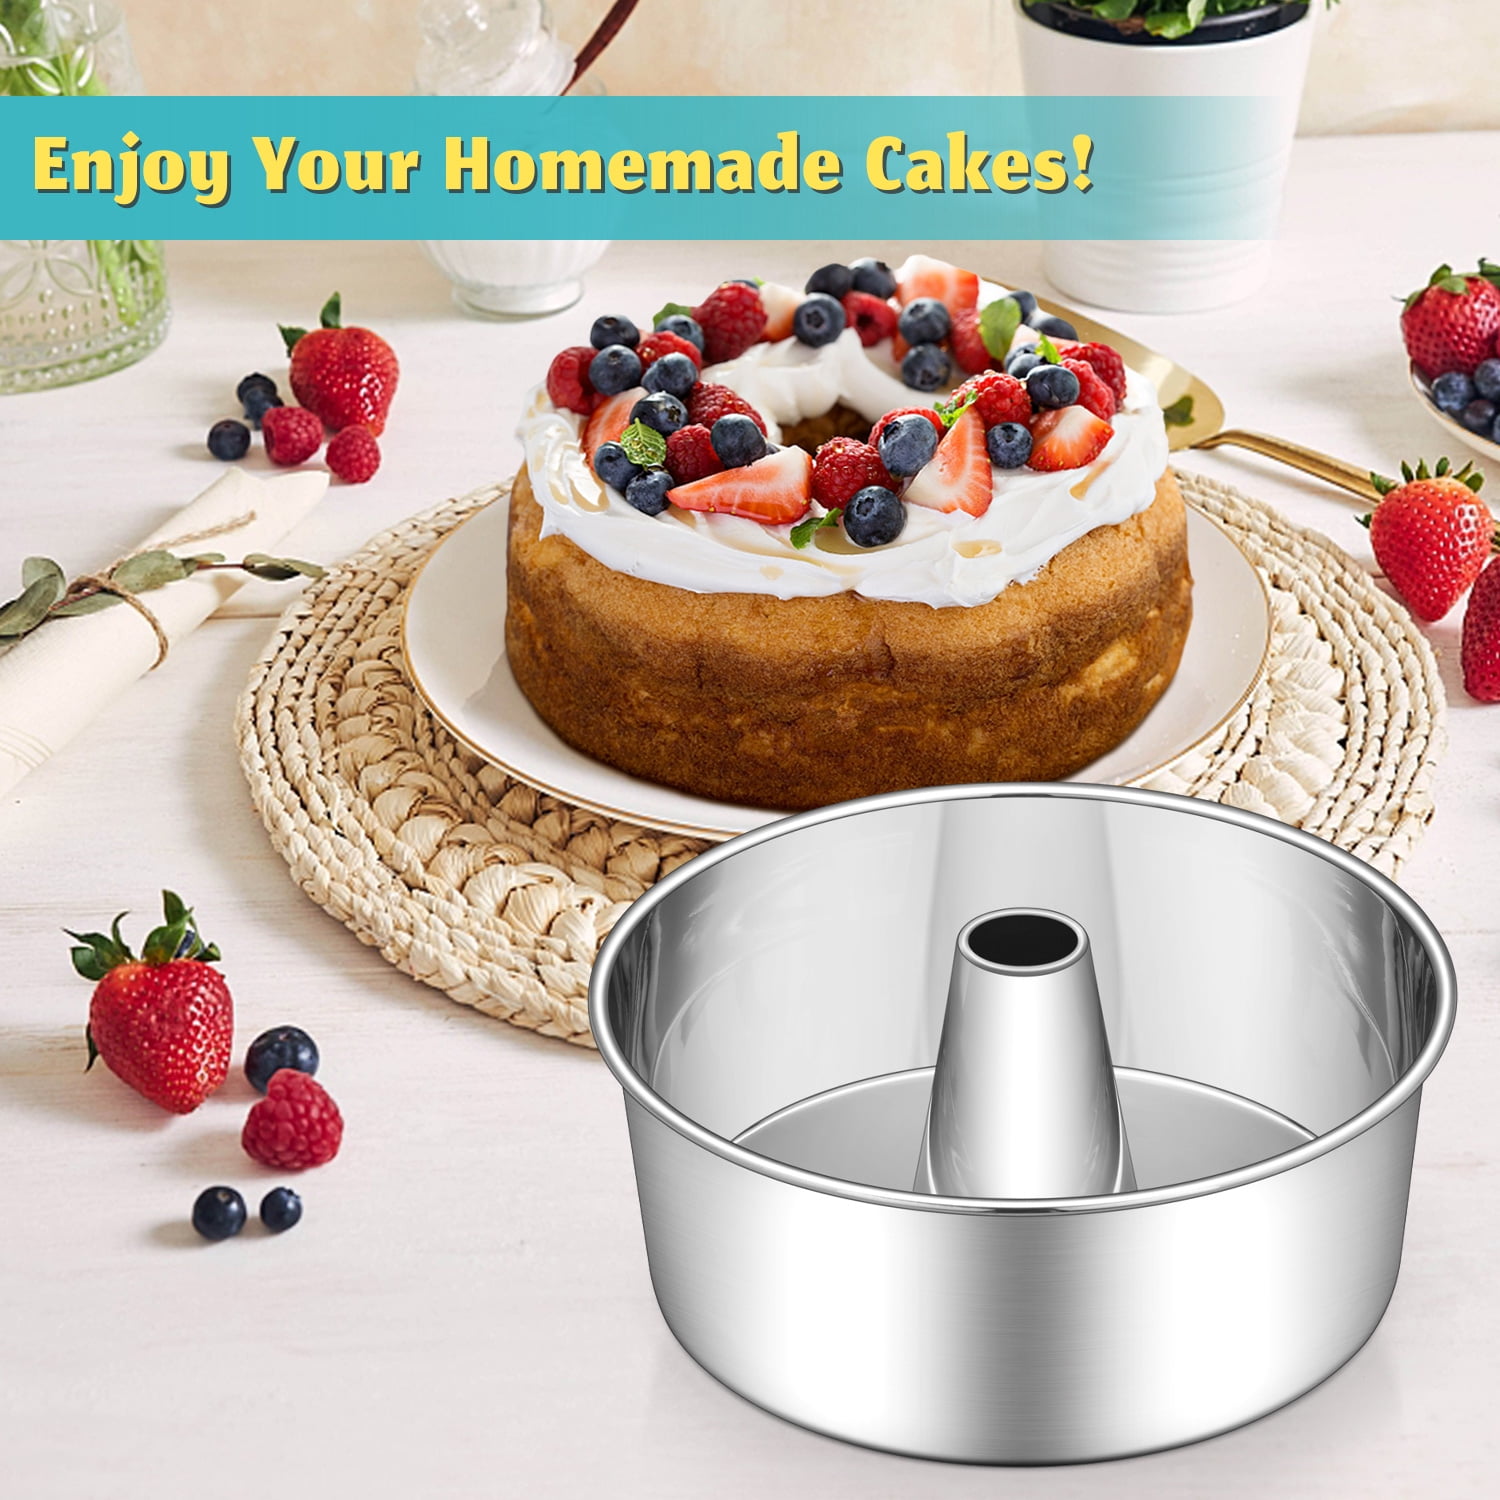 TeamFar 10 Inch Angel Food Cake Pan, Non-Stick Coating Stainless Steel Core  Pound Cake Pan with Tube, Healthy & Heavy-Duty, One-piece & Hollow Design